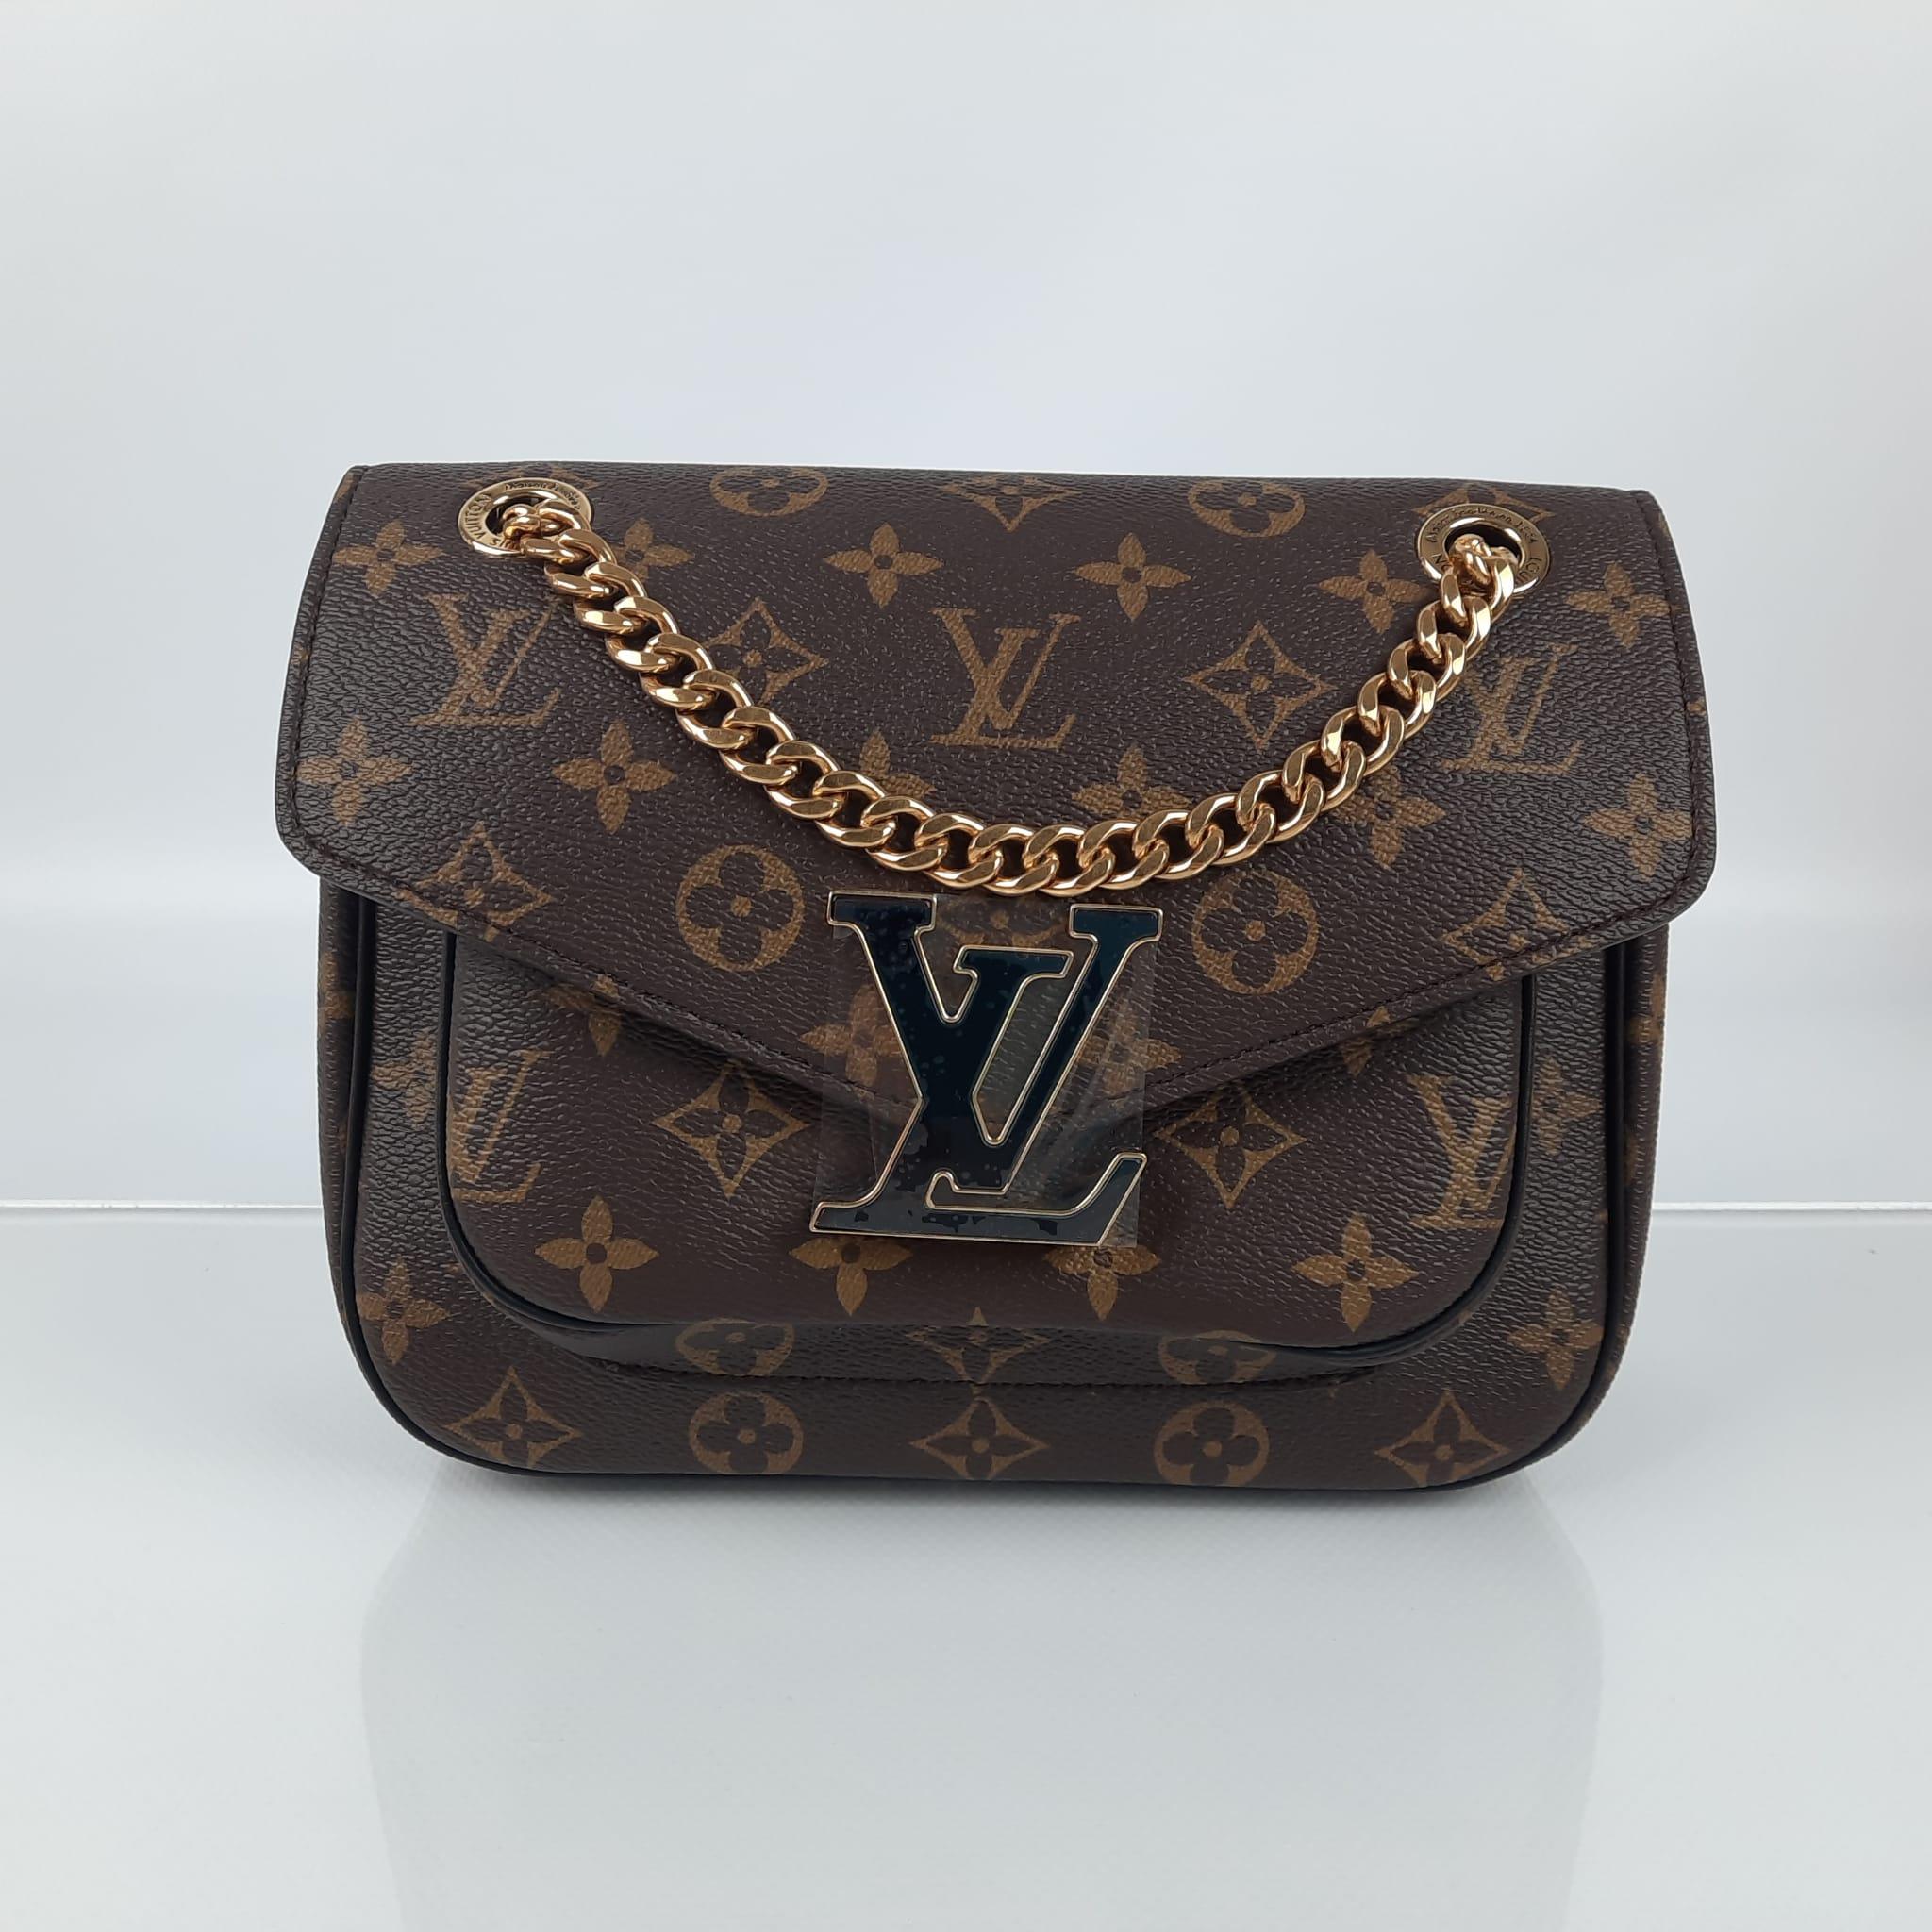 lv passy outfit